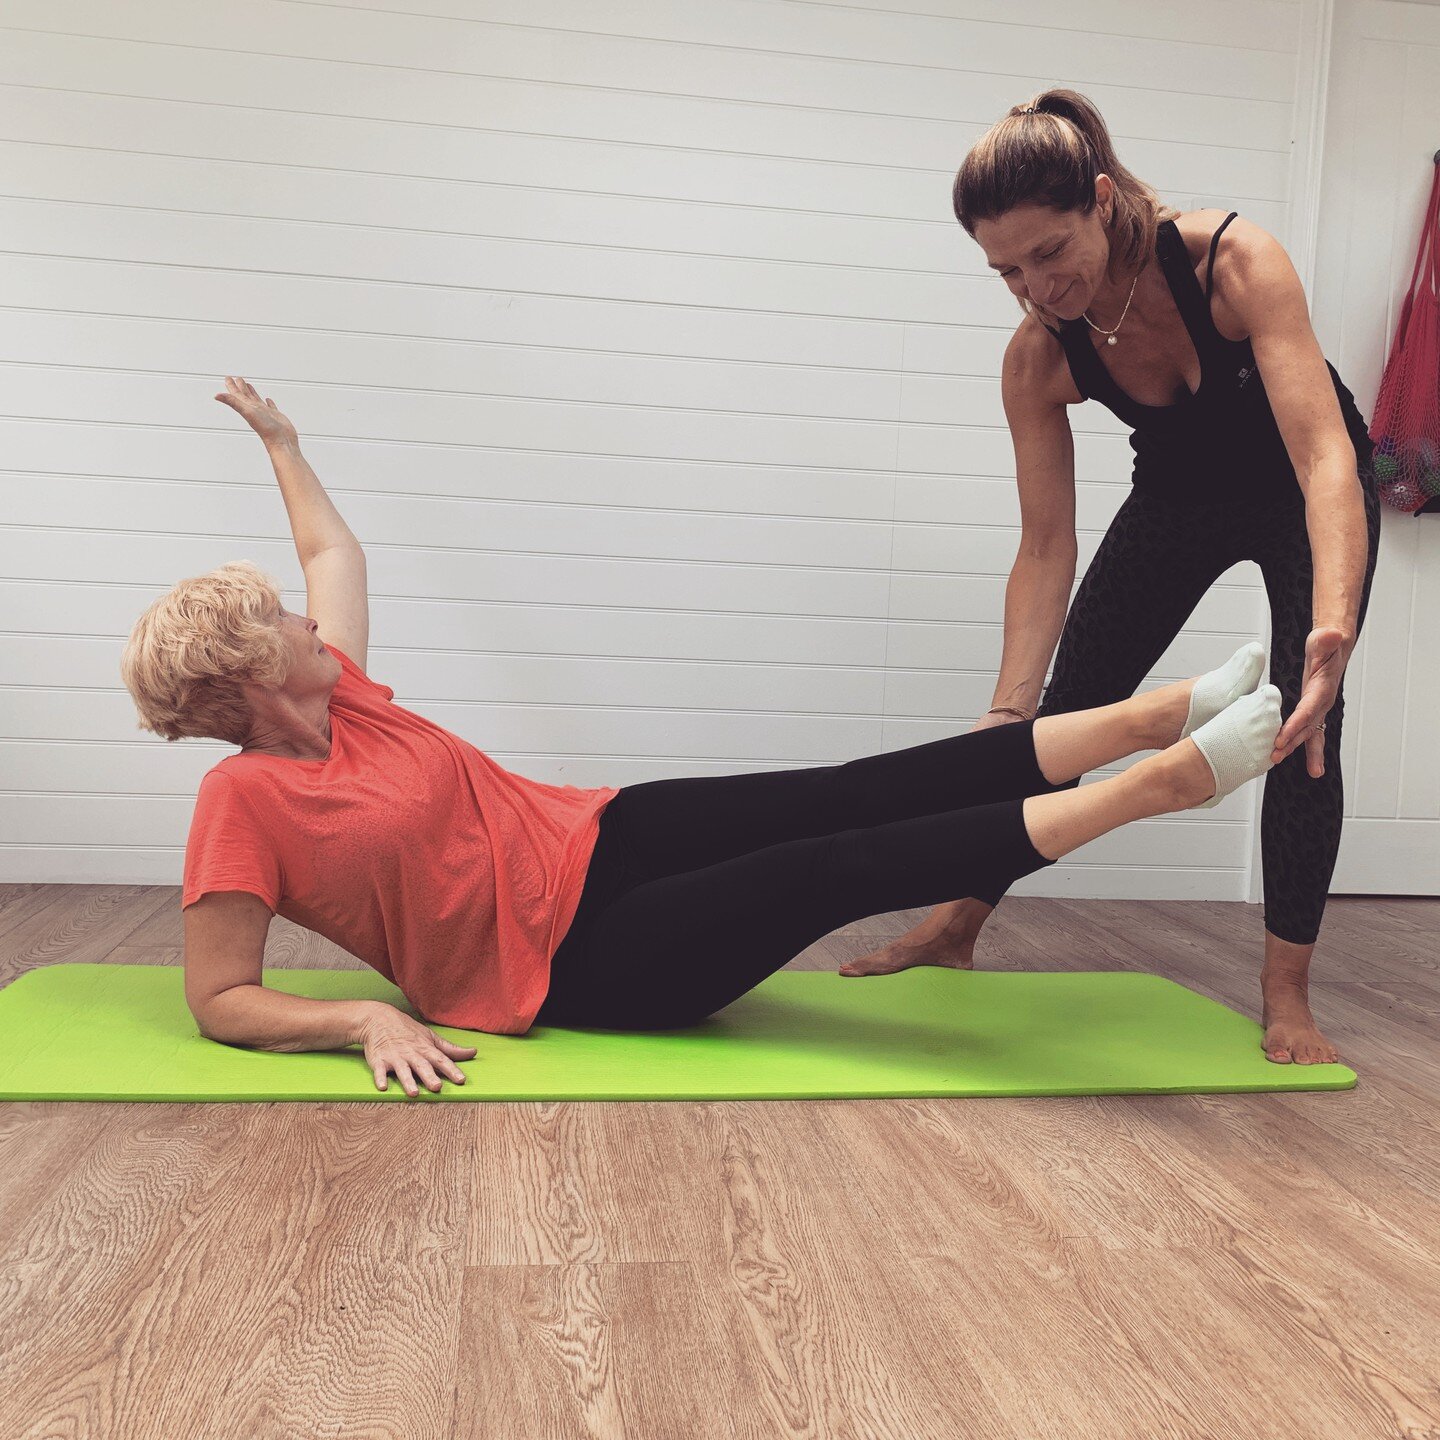 Here at the Neuro Hub we create bespoke exercise programmes tailored to your individual needs to help with a wide range of neurological conditions. We combine our Pilates and physiotherapist skills to create one-to-one care packages to help you on yo